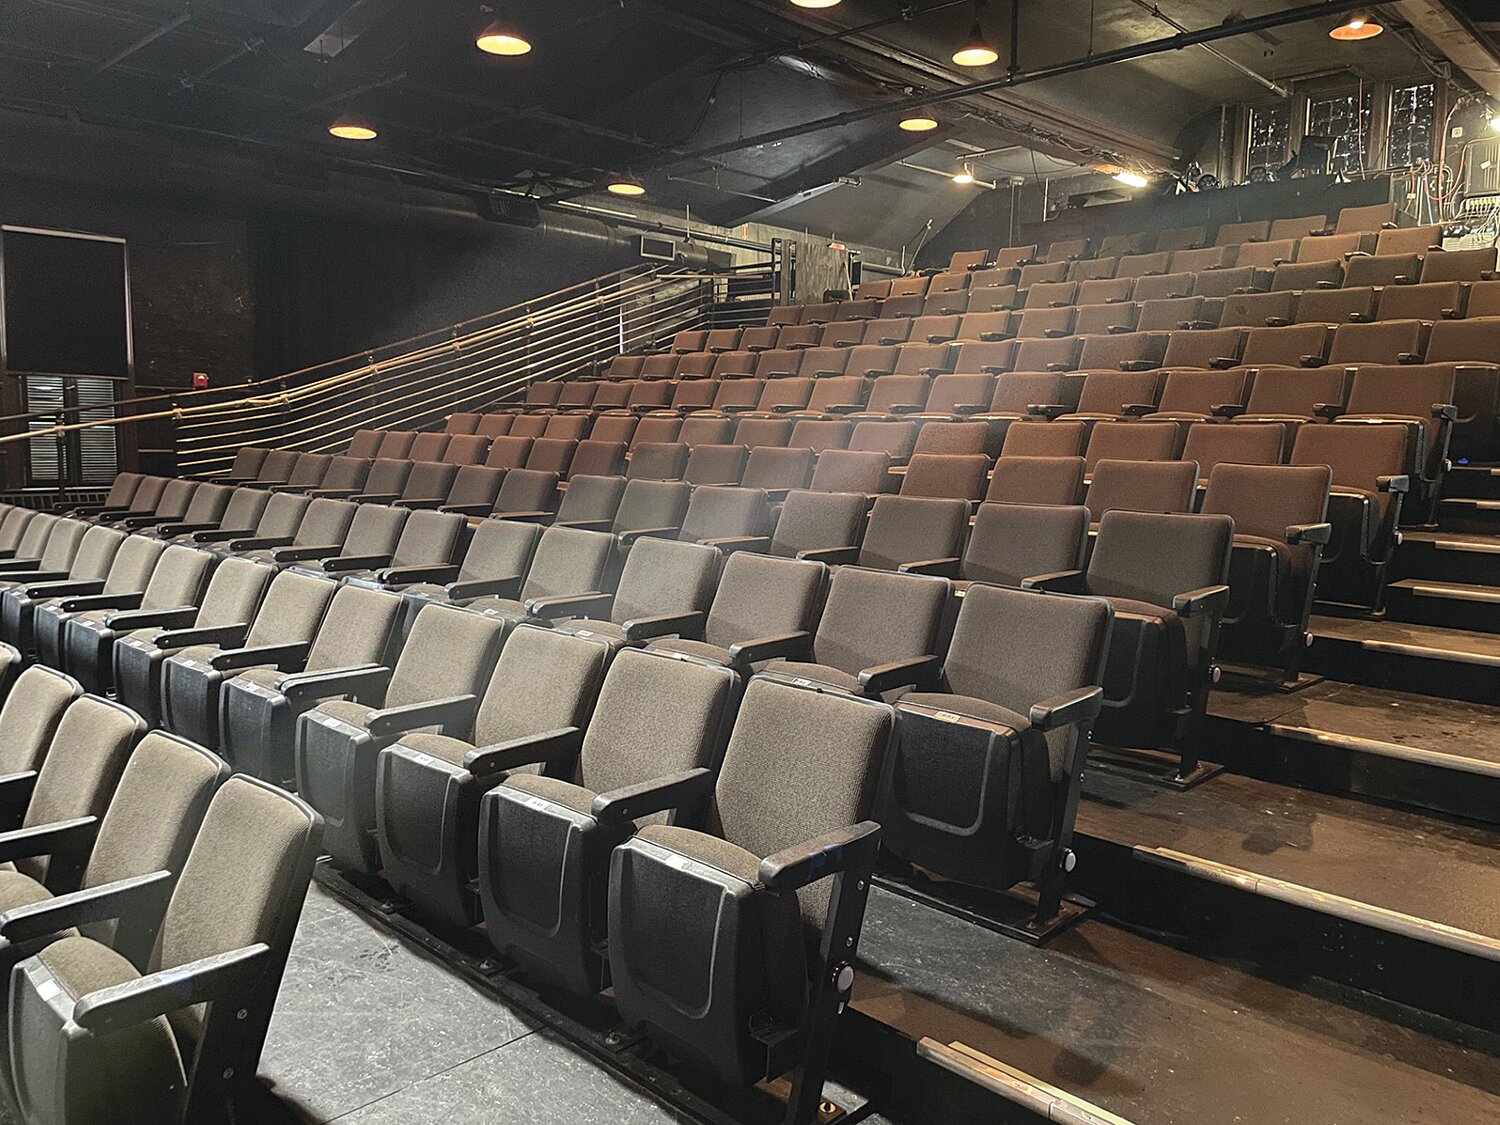 Many volunteers from multiple organizations worked with the property owner to re-construct the entire theater space. Left “in the round” by former owners, the stage, risers and seats were all removed, rebuilt and re-installed in a more traditional theater format.